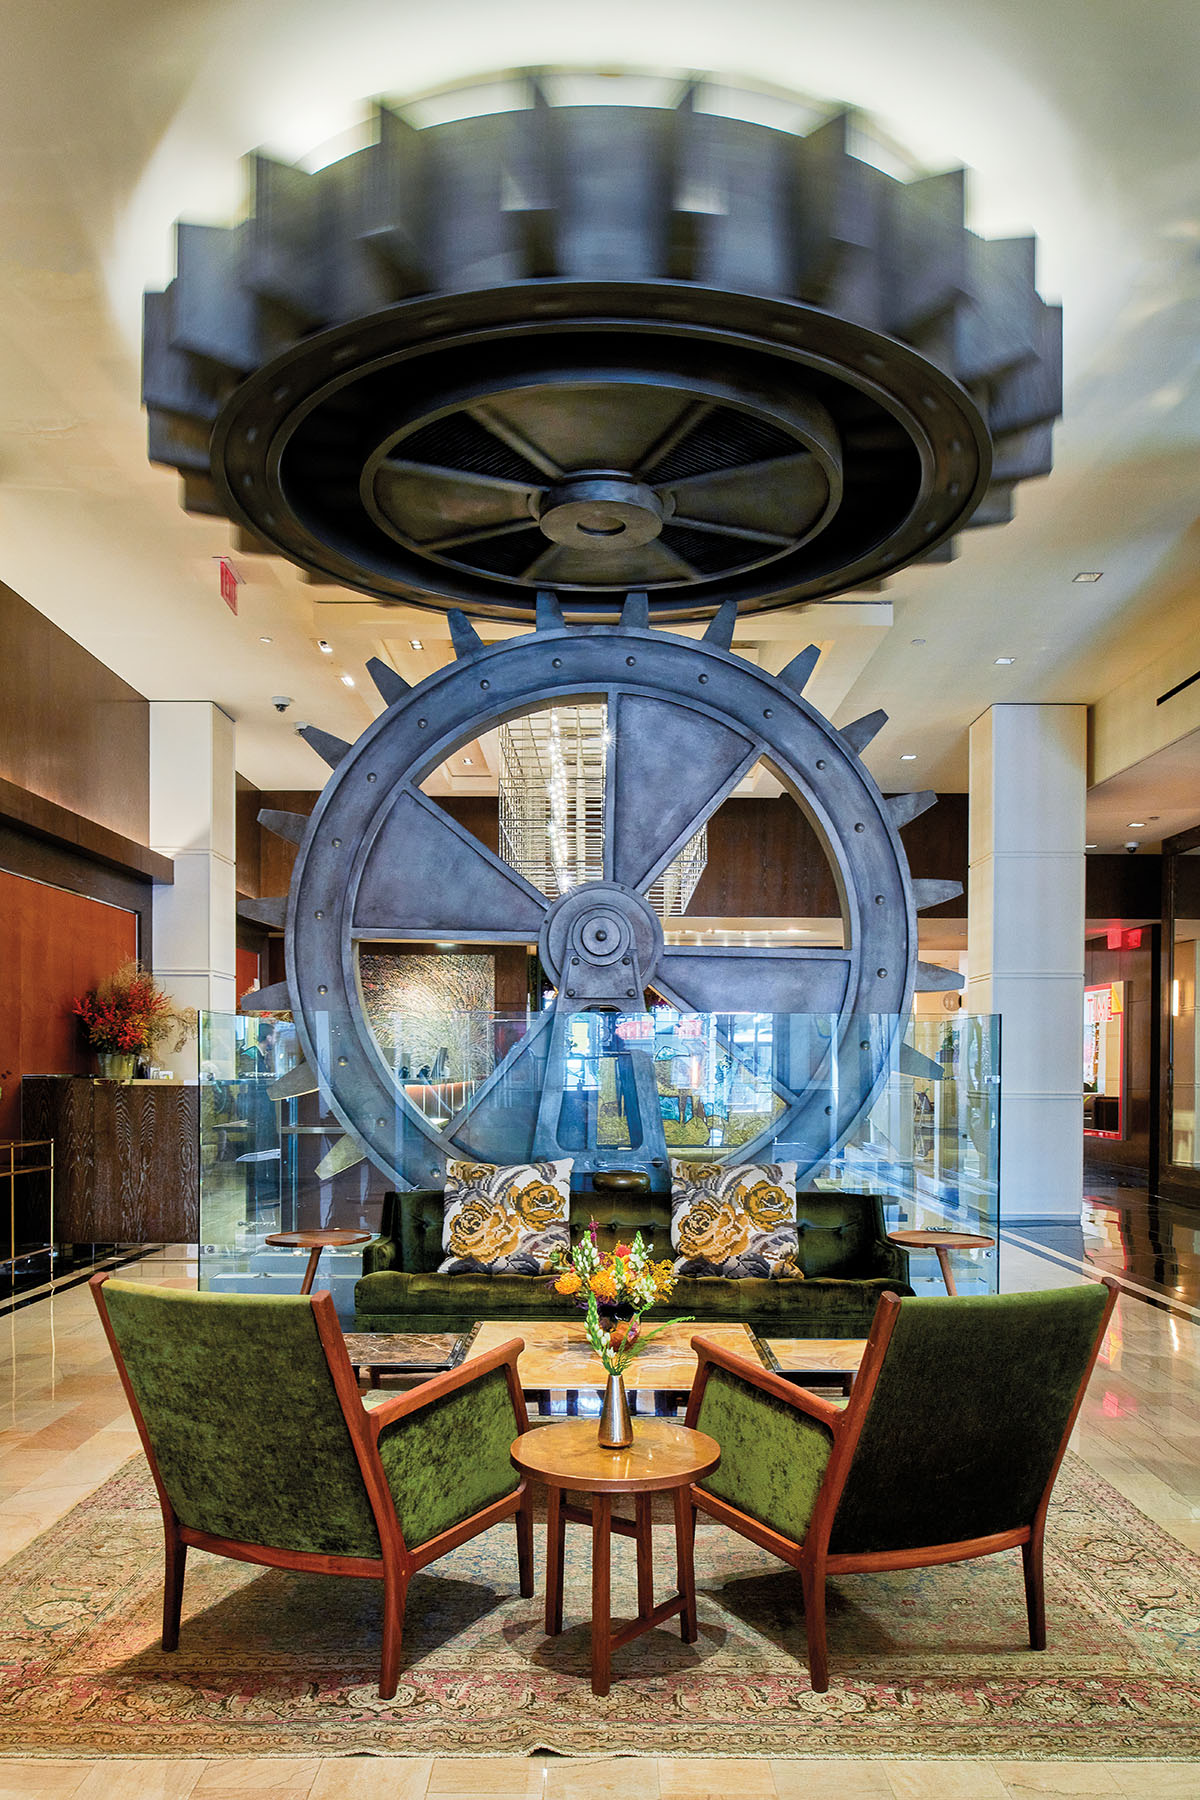 Large gears adorn a richly decorated hotel lobby